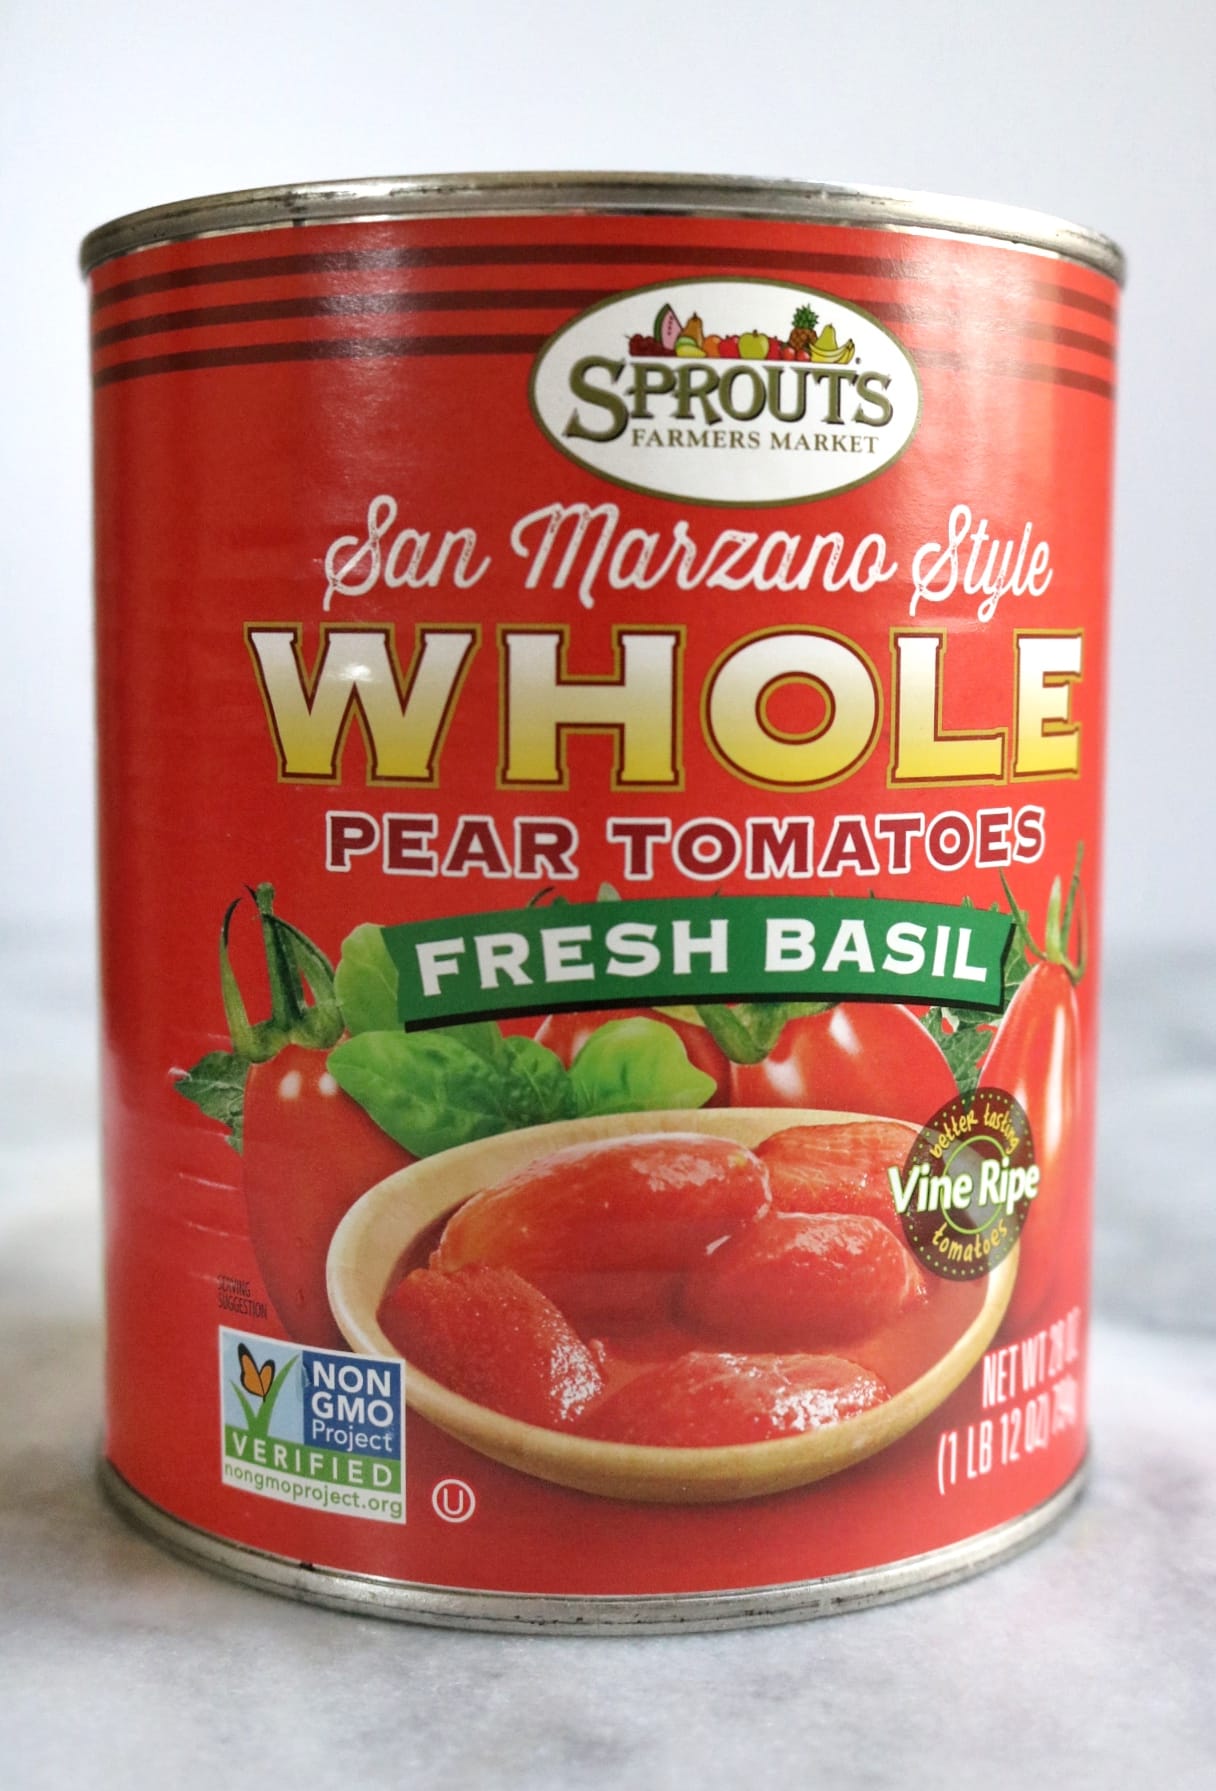 Can of Sprouts Farmers Market San Marzano Style Whole Pear Tomatoes | The Nutrition Adventure